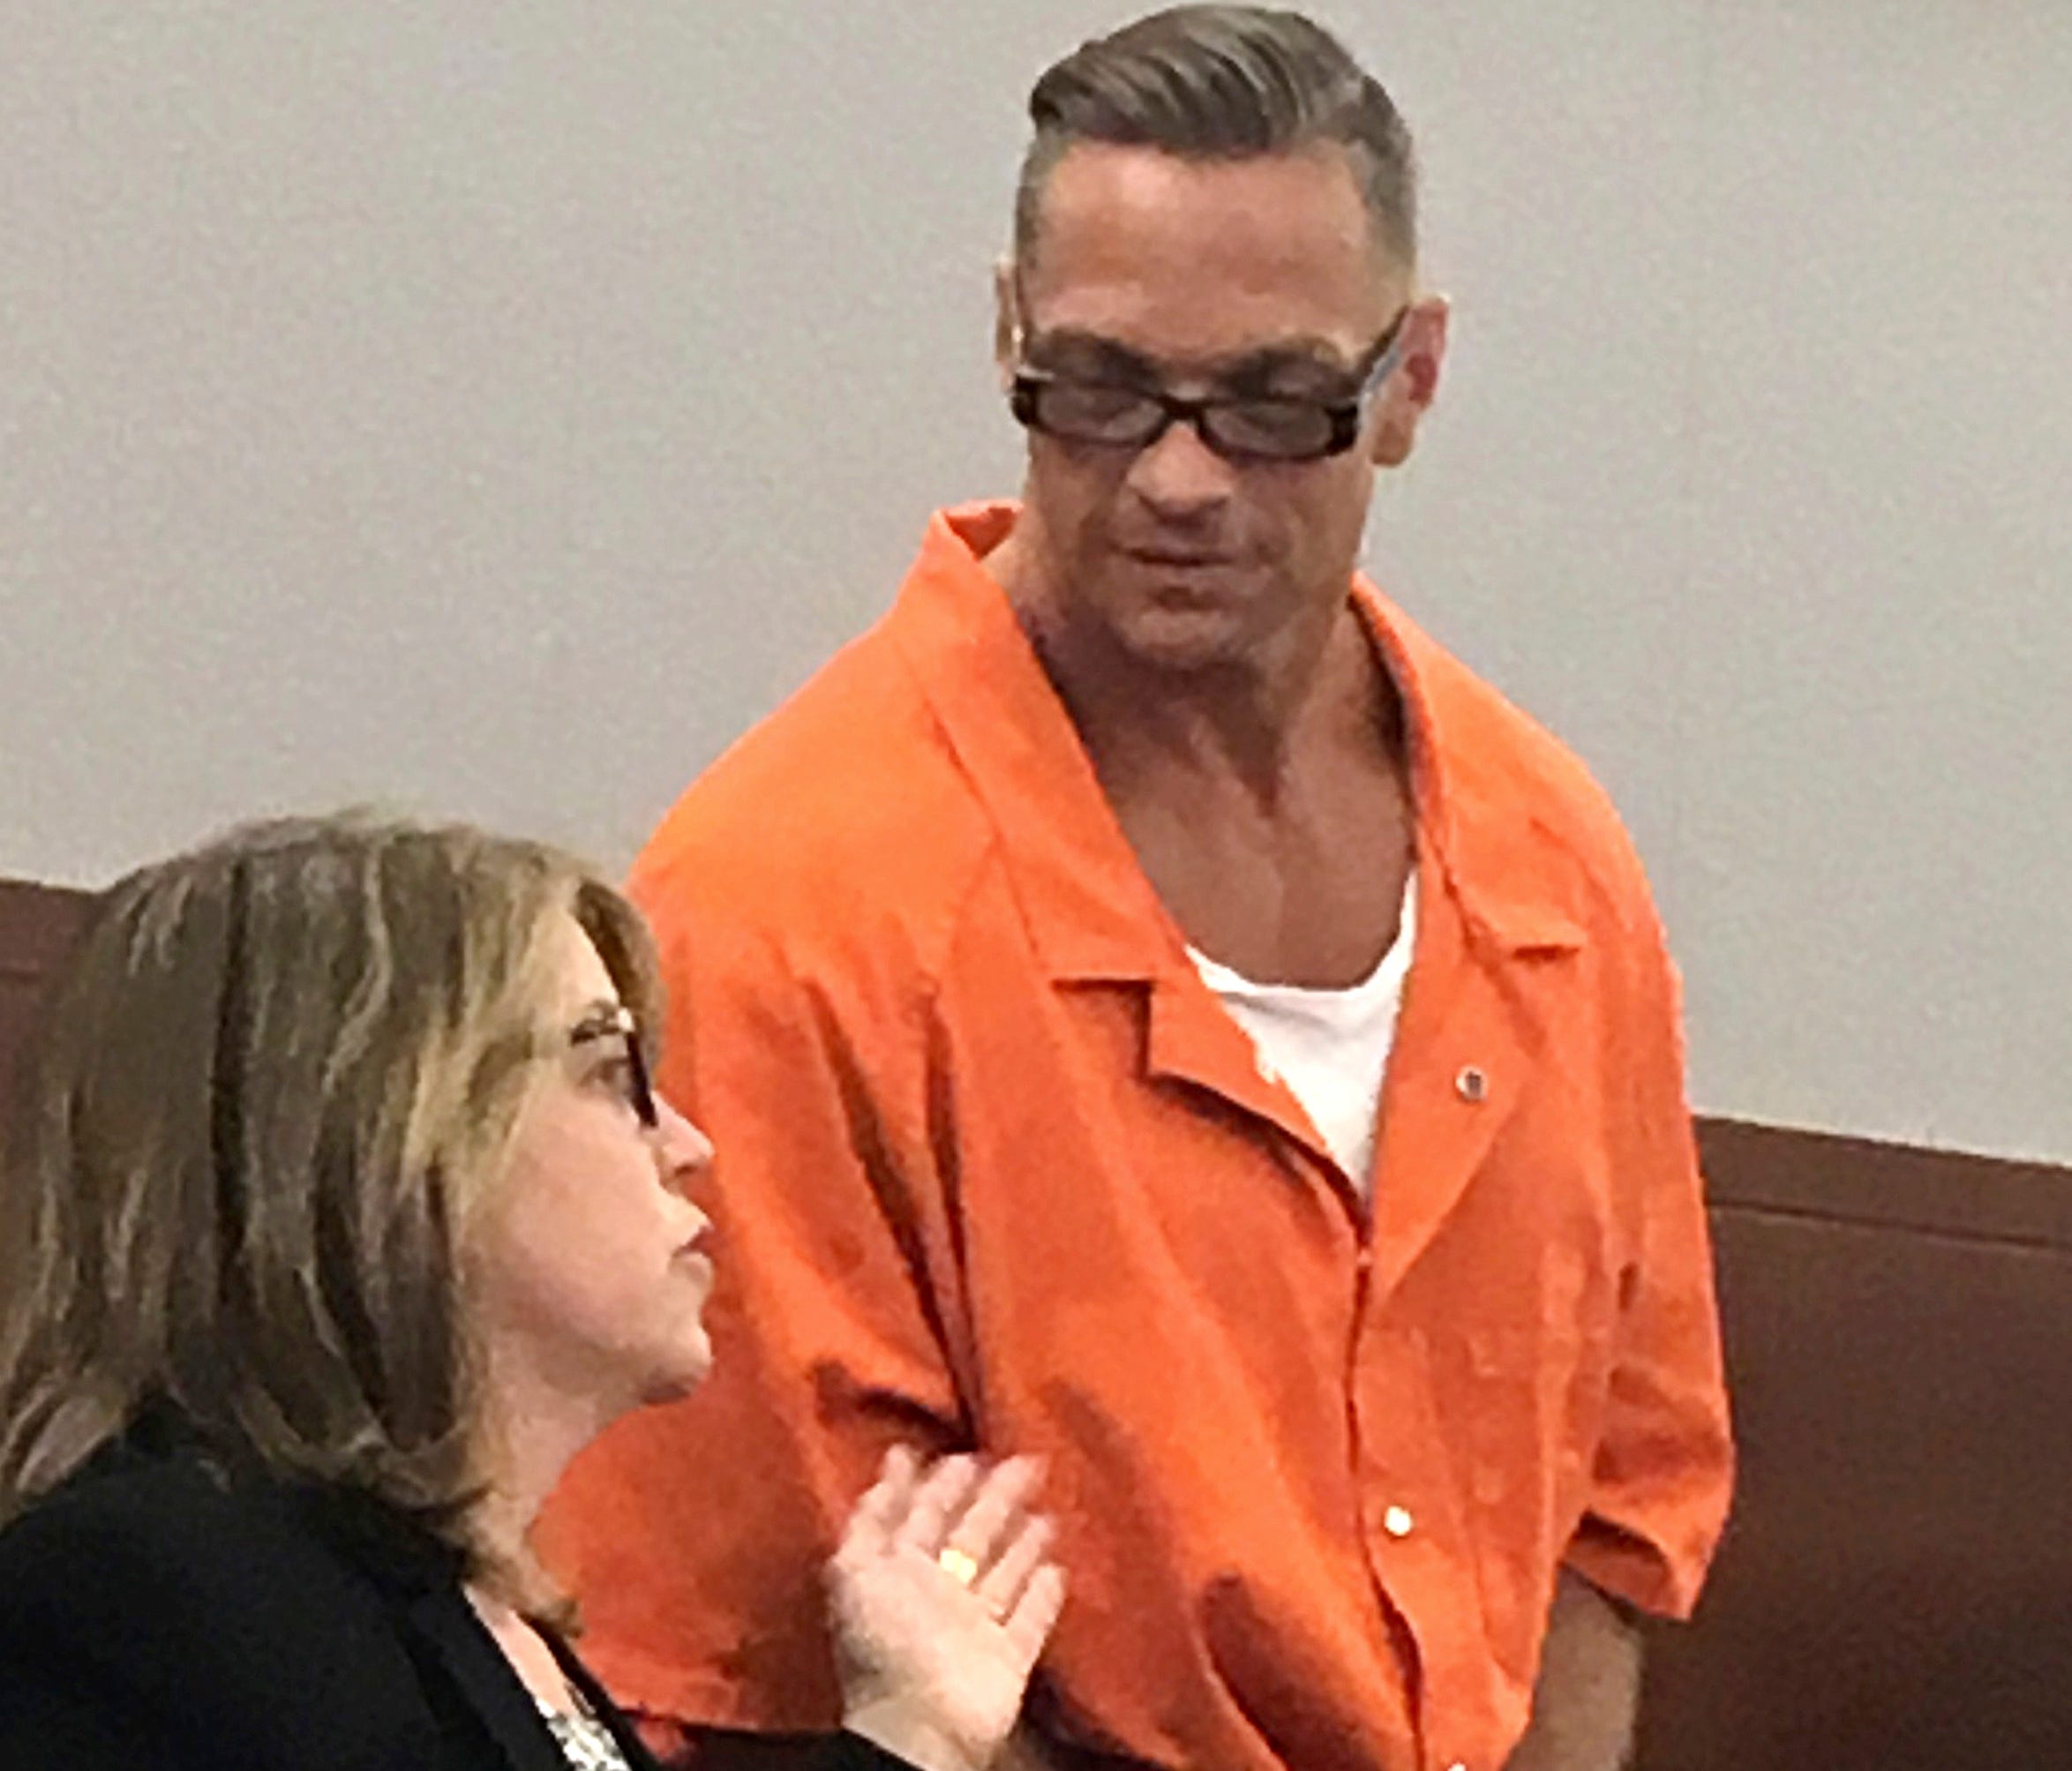 Nevada death row inmate Scott Raymond Dozier confers with Lori Teicher, a federal public defender involved in his case, during an appearance in Clark County District Court in Las Vegas.